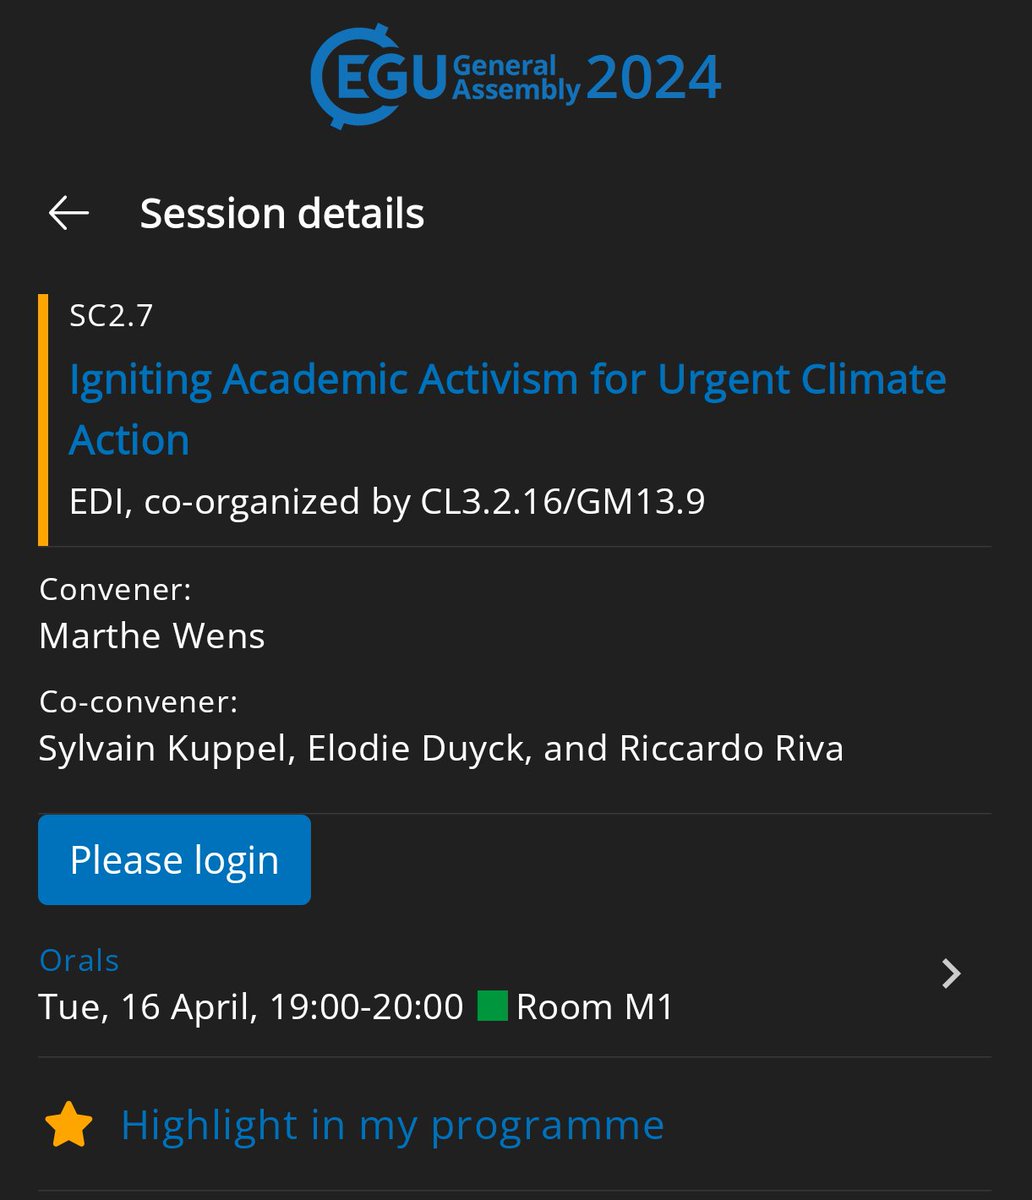 ⭐ This evening at #EGU : a short course on collaborating for climate advocacy and activism, discussing meaningful ways for taking direct action, with contributions from @ThierryAaron @ultracricket & @gerritschaafsma 👇meetingorganizer.copernicus.org/EGU24/session/… @ScientistRebel1 @S4F_INTL